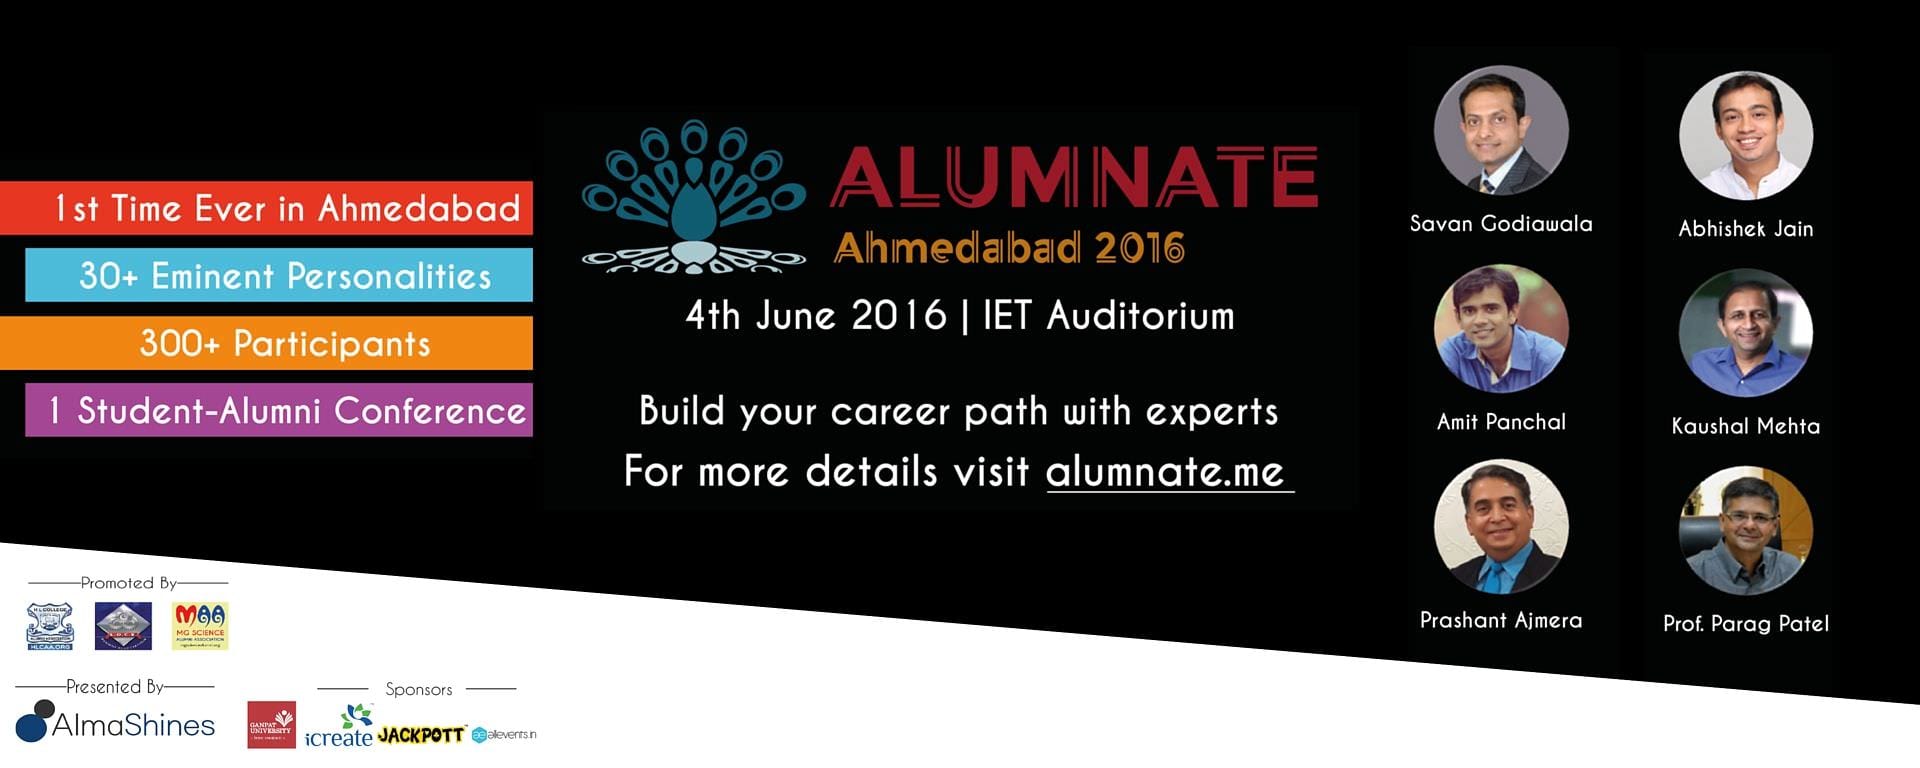 REASONS WHY YOU CAN’T AFFORD TO MISS ALUMNATE AHMEDABAD 2016